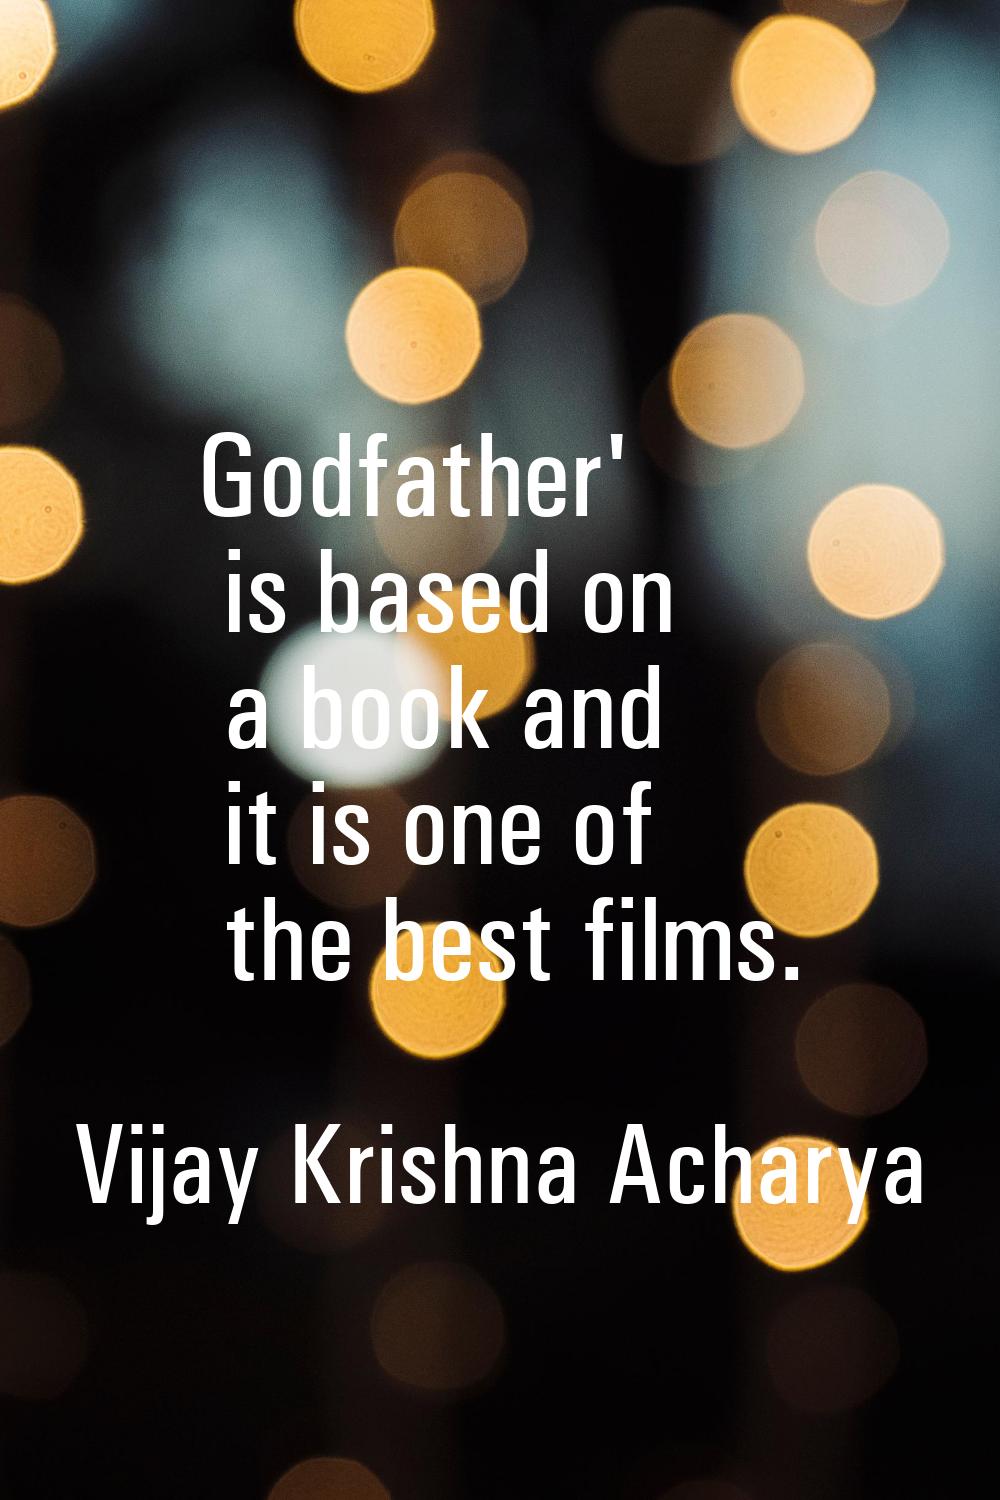 Godfather' is based on a book and it is one of the best films.